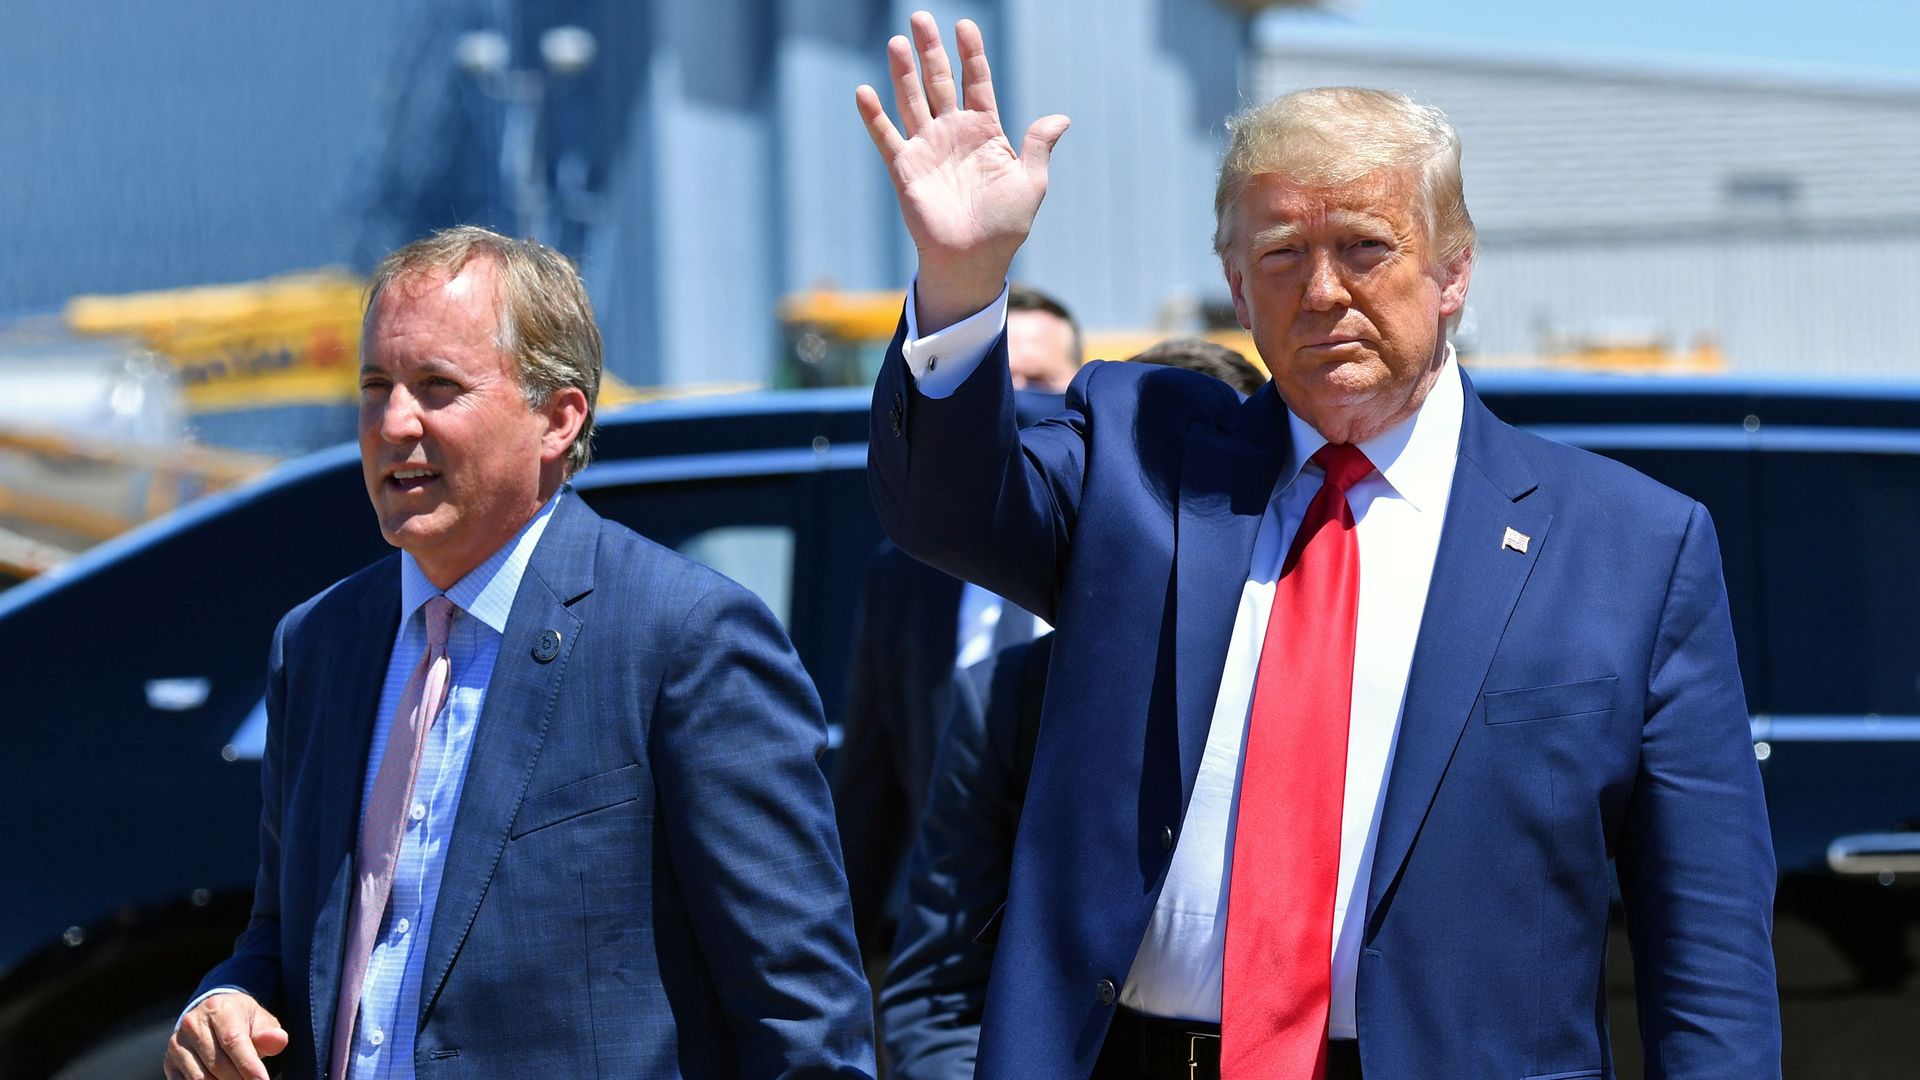  President Trump waves upon arrival, alongside Attorney General of Texas Ken Paxton (L) in Dallas, Texas, on June 11, 2020